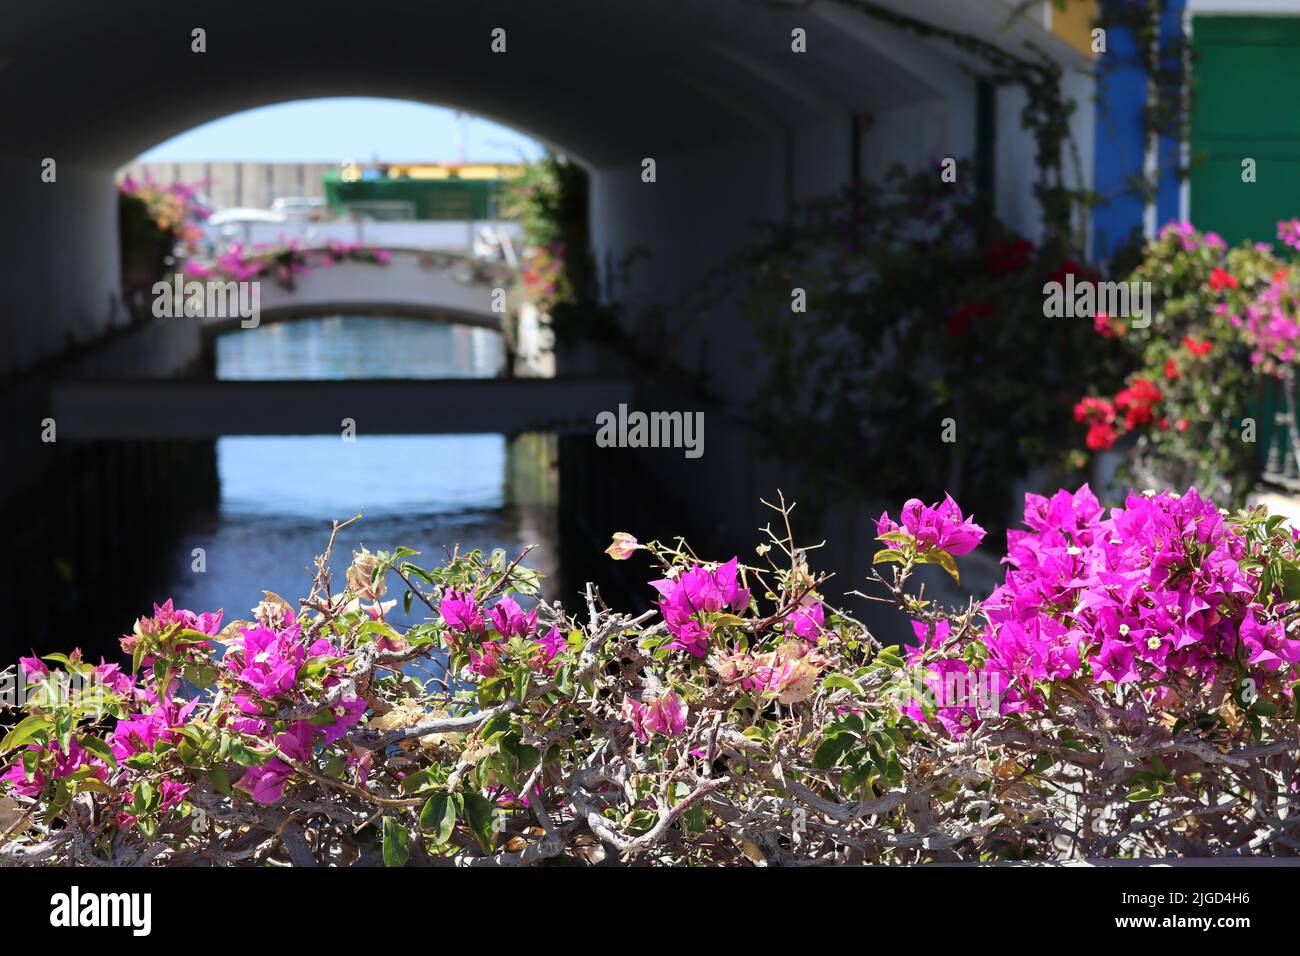 Vivid magenta bougainvillea flowers growing on a bridge parapet over a channel of water from the marina, Playa de Mogan, Gran Canaria. Stock Photo